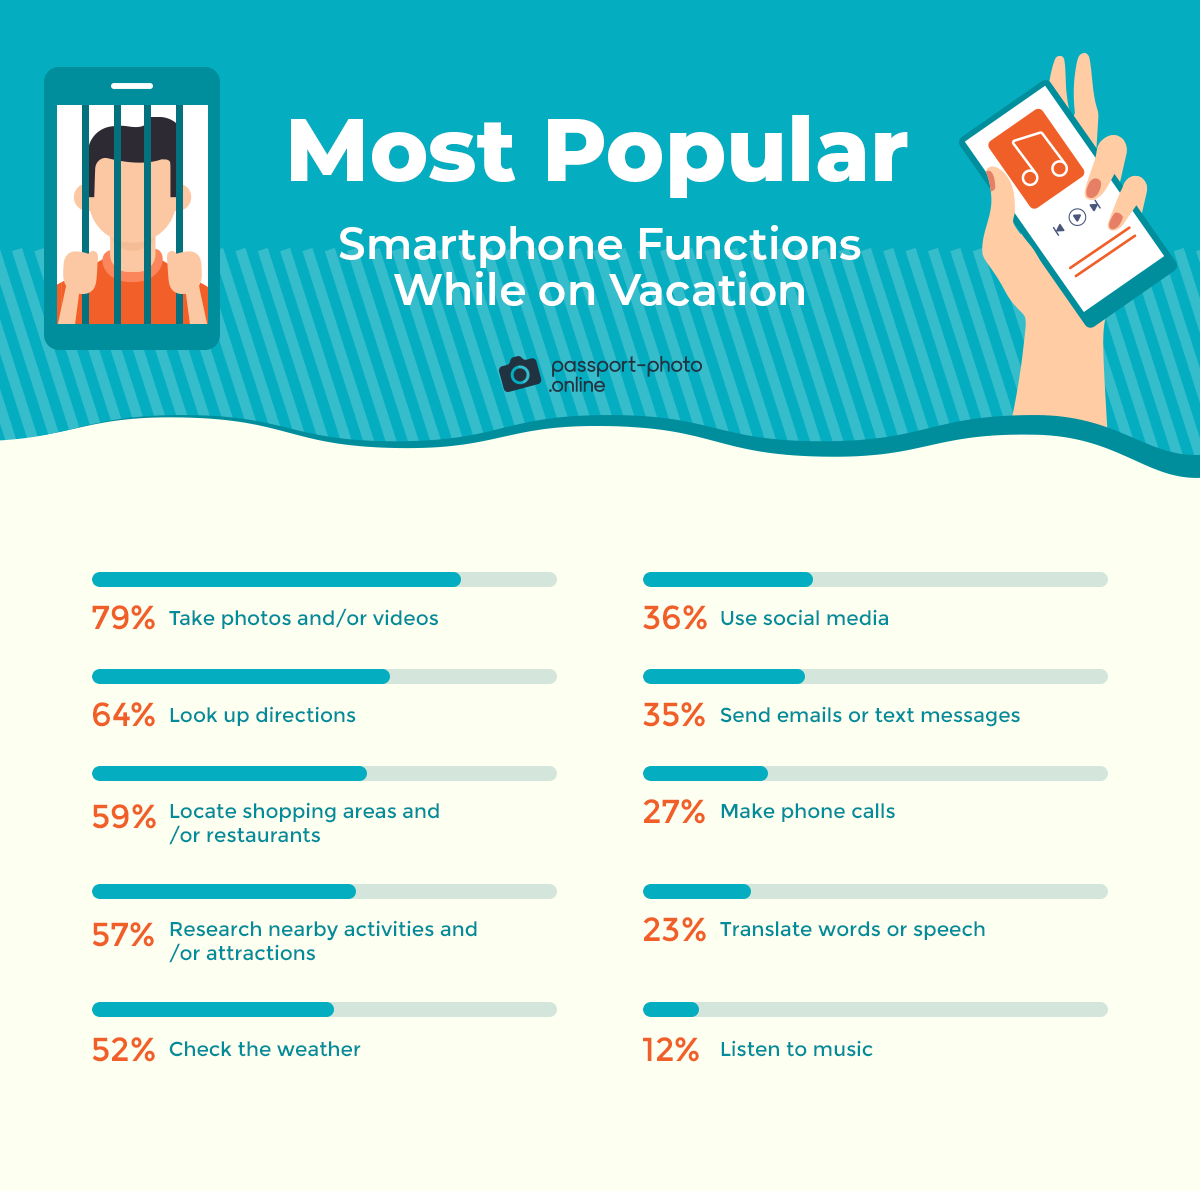 most popular smartphone functions while on vacation